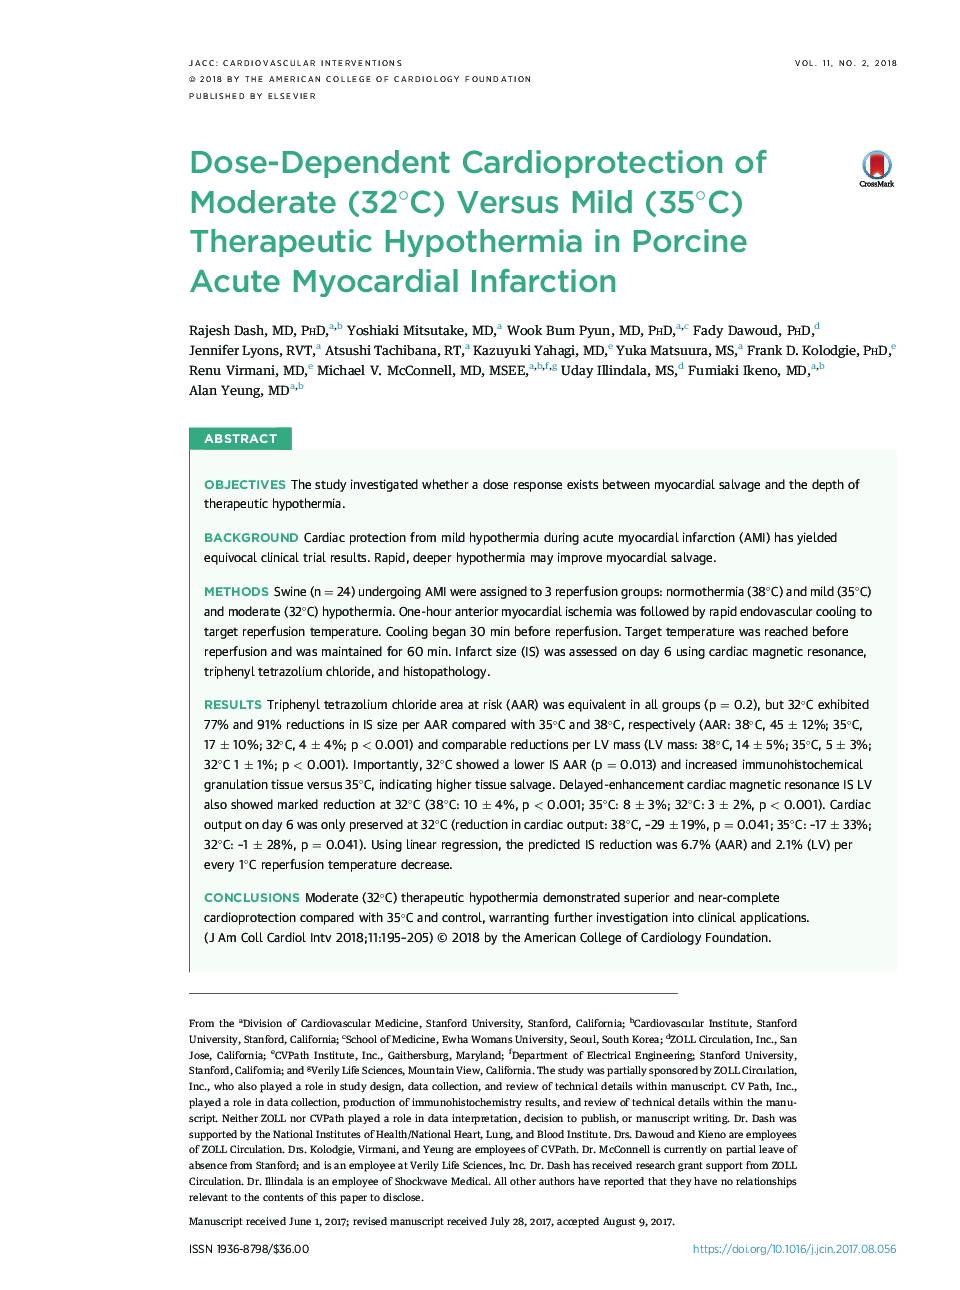 Dose-Dependent Cardioprotection of Moderate (32Â°C) Versus Mild (35Â°C) Therapeutic Hypothermia in Porcine AcuteÂ Myocardial Infarction